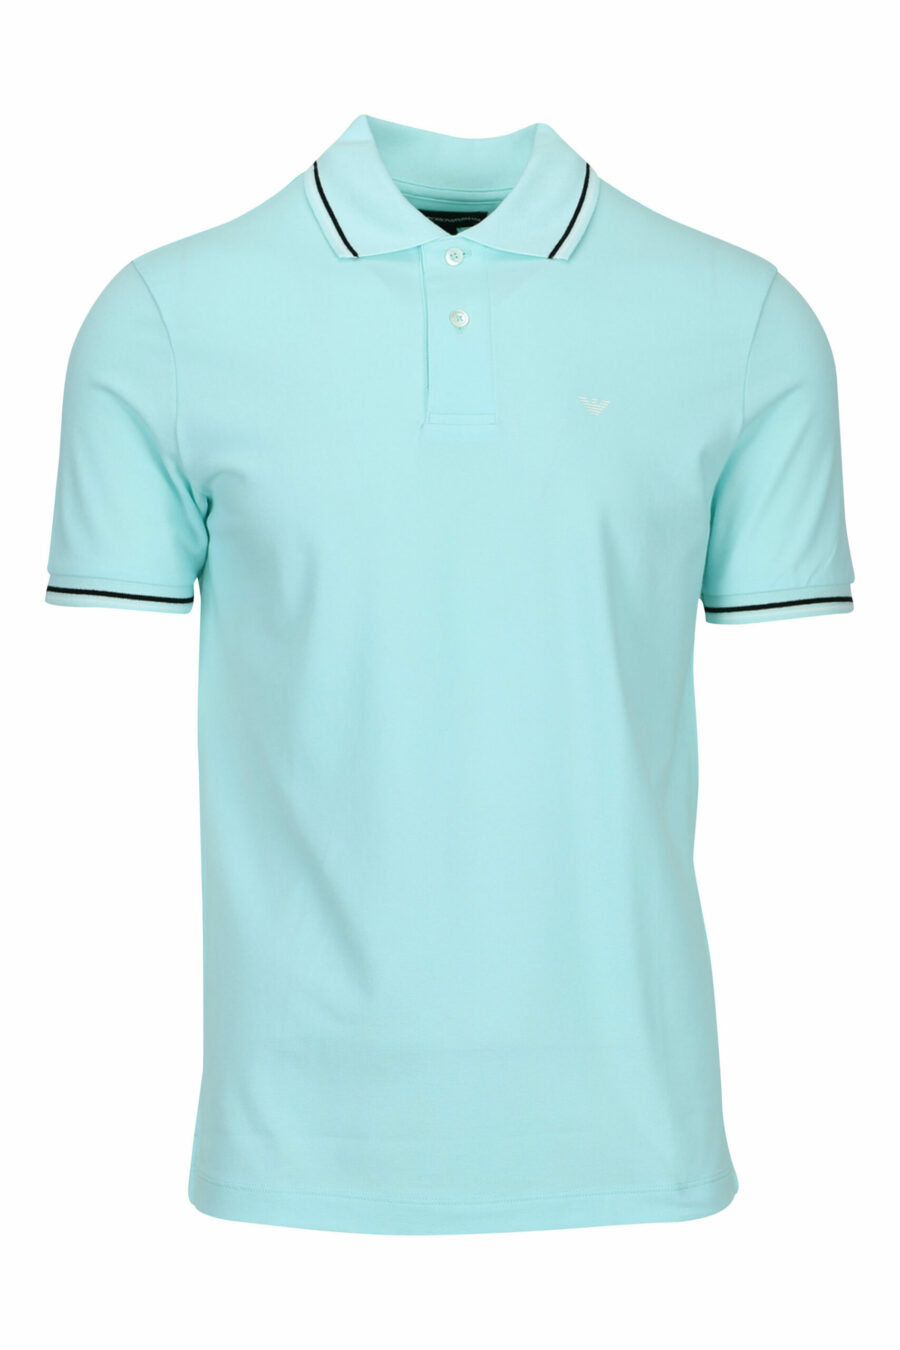 Light blue knitted polo shirt with striped collar and mini eagle logo - 8058947672141 scaled